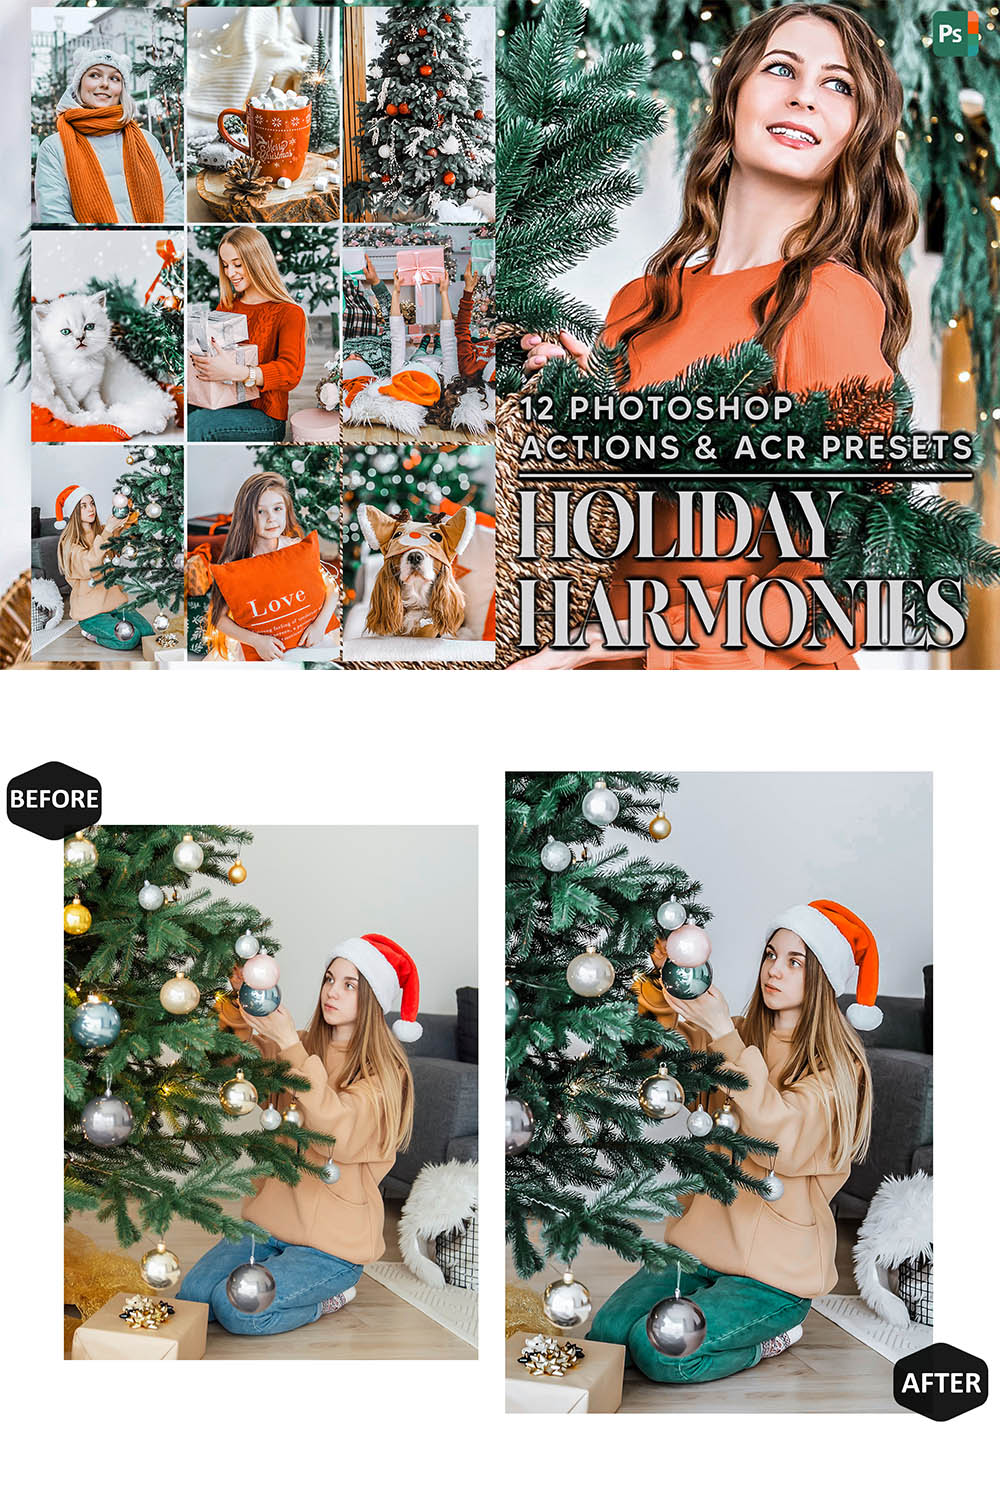 12 Photoshop Actions, Holiday Harmonies Ps Action, Orange Xmas ACR Preset, Christmas Ps Filter, Atn Portrait And Lifestyle Theme For Instagram, Blogger pinterest preview image.